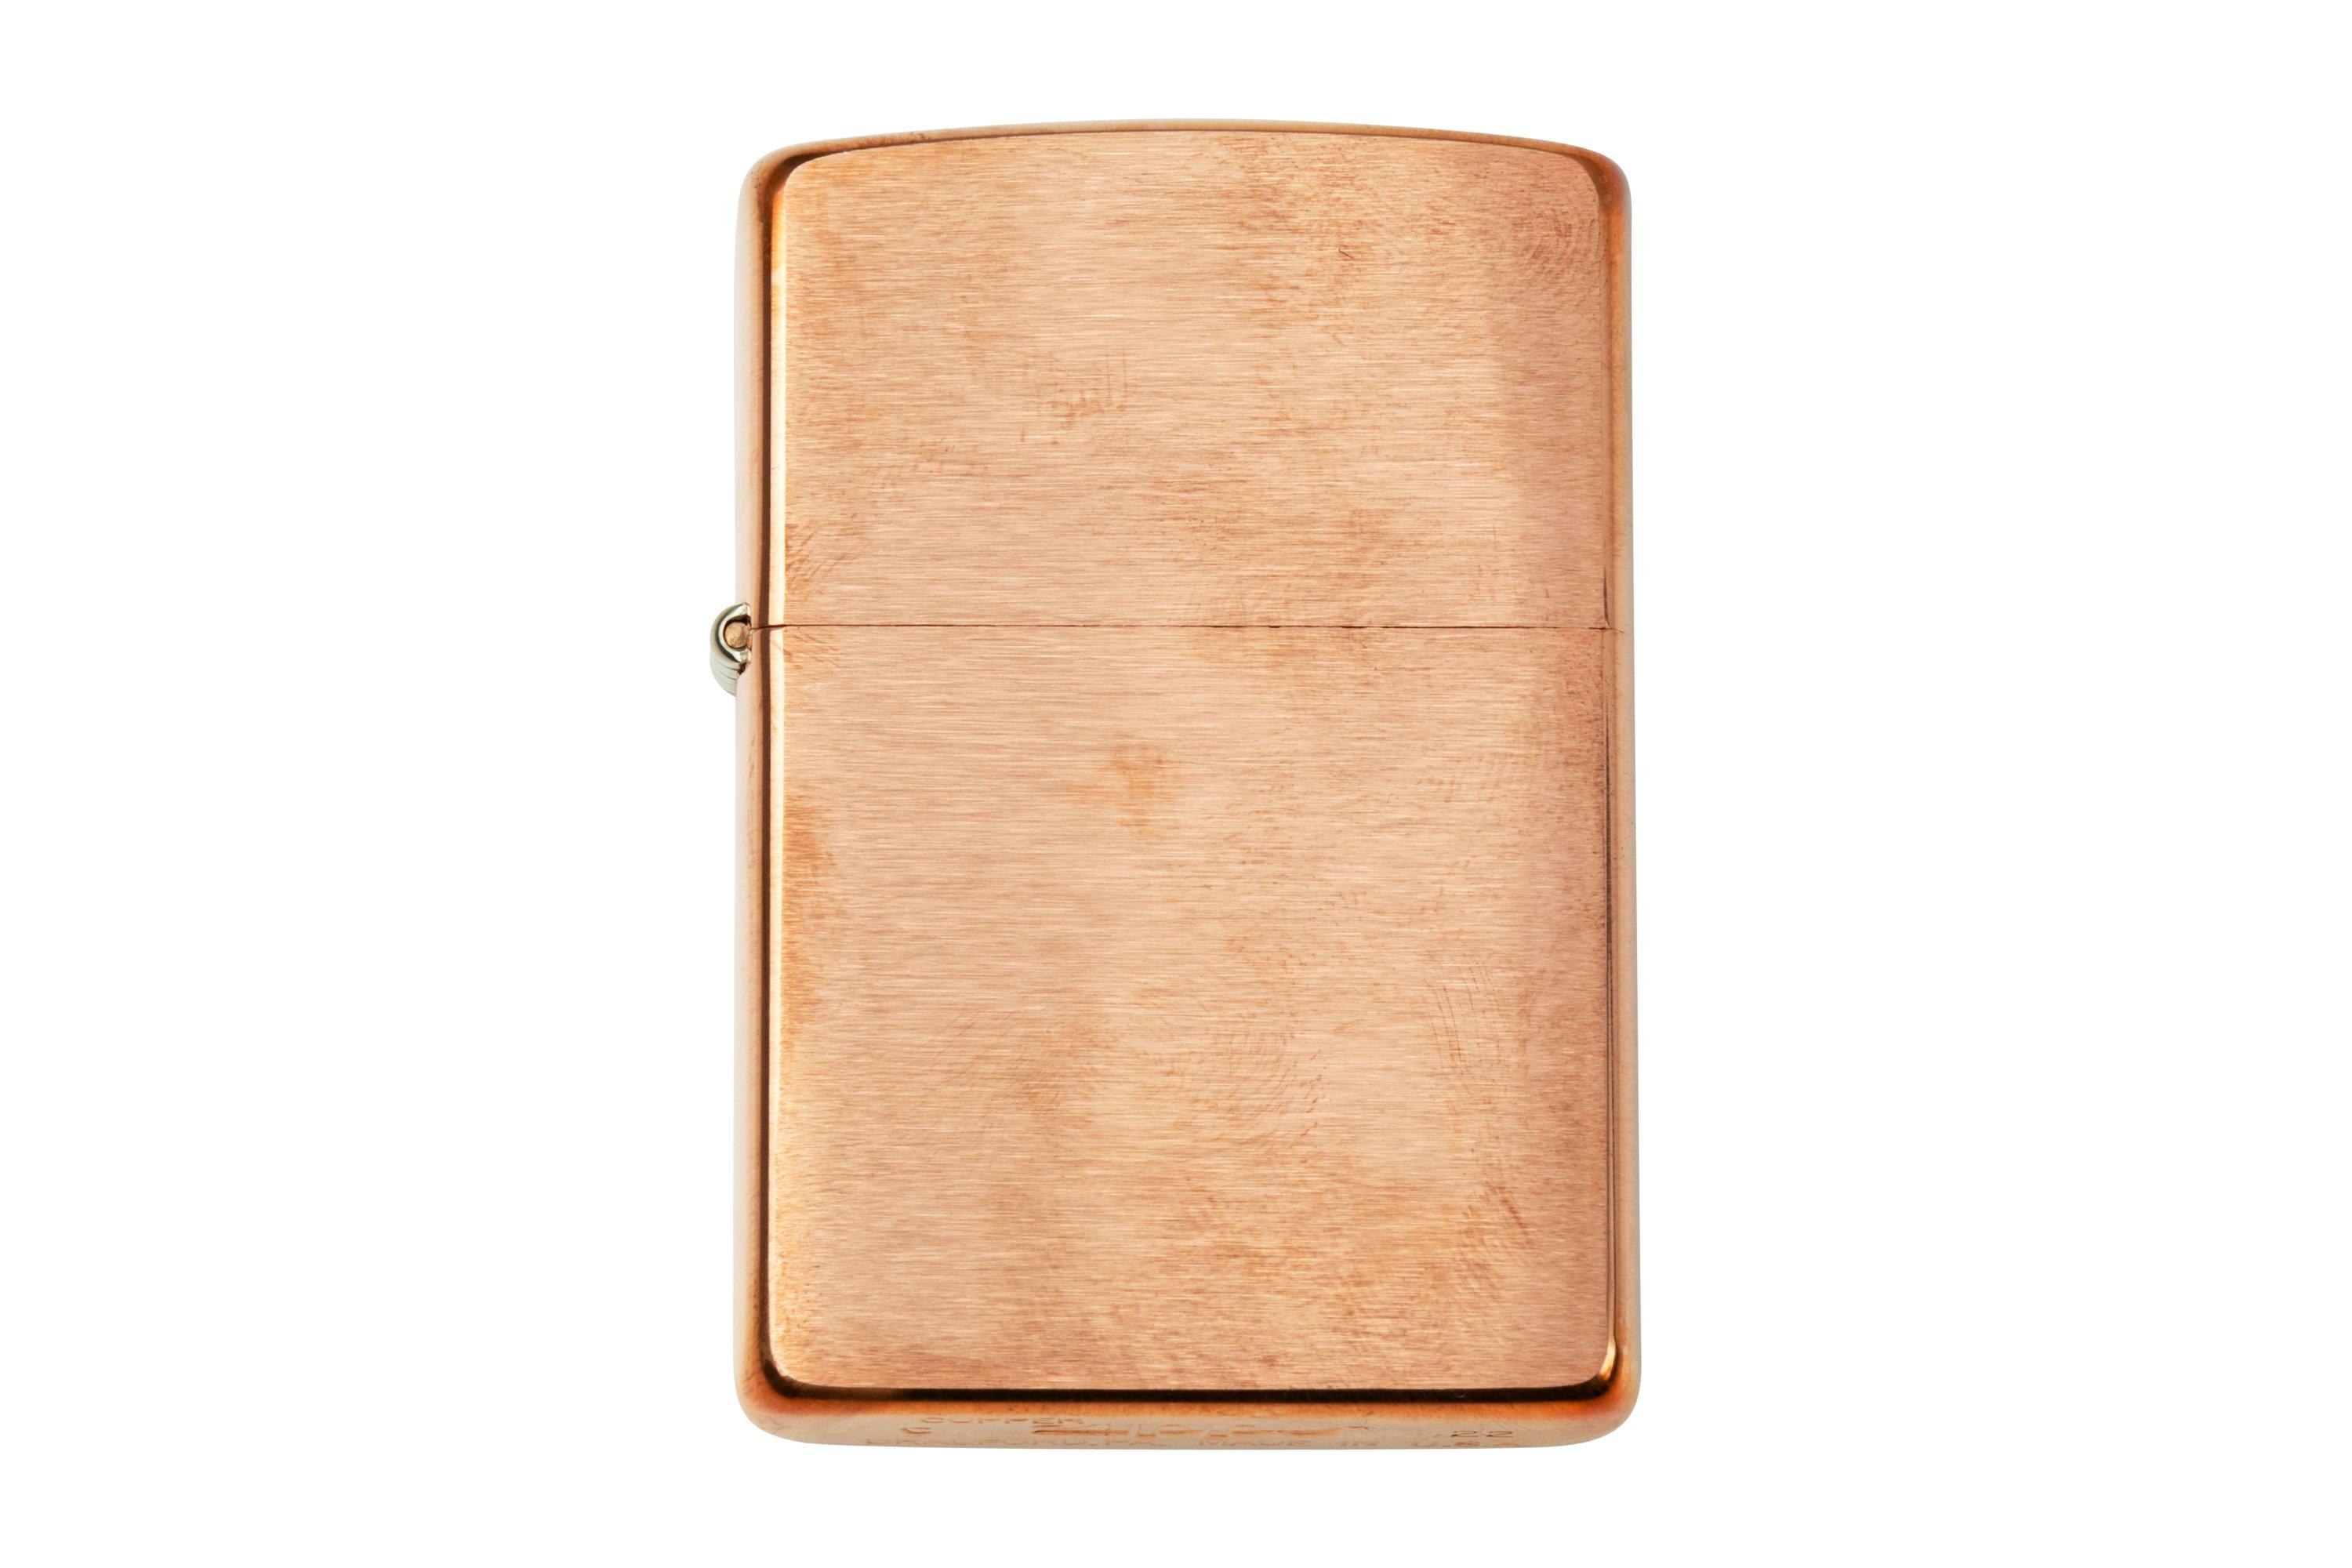 Pure Copper Hand-Made Lighter Case Is Suitable for Collecting